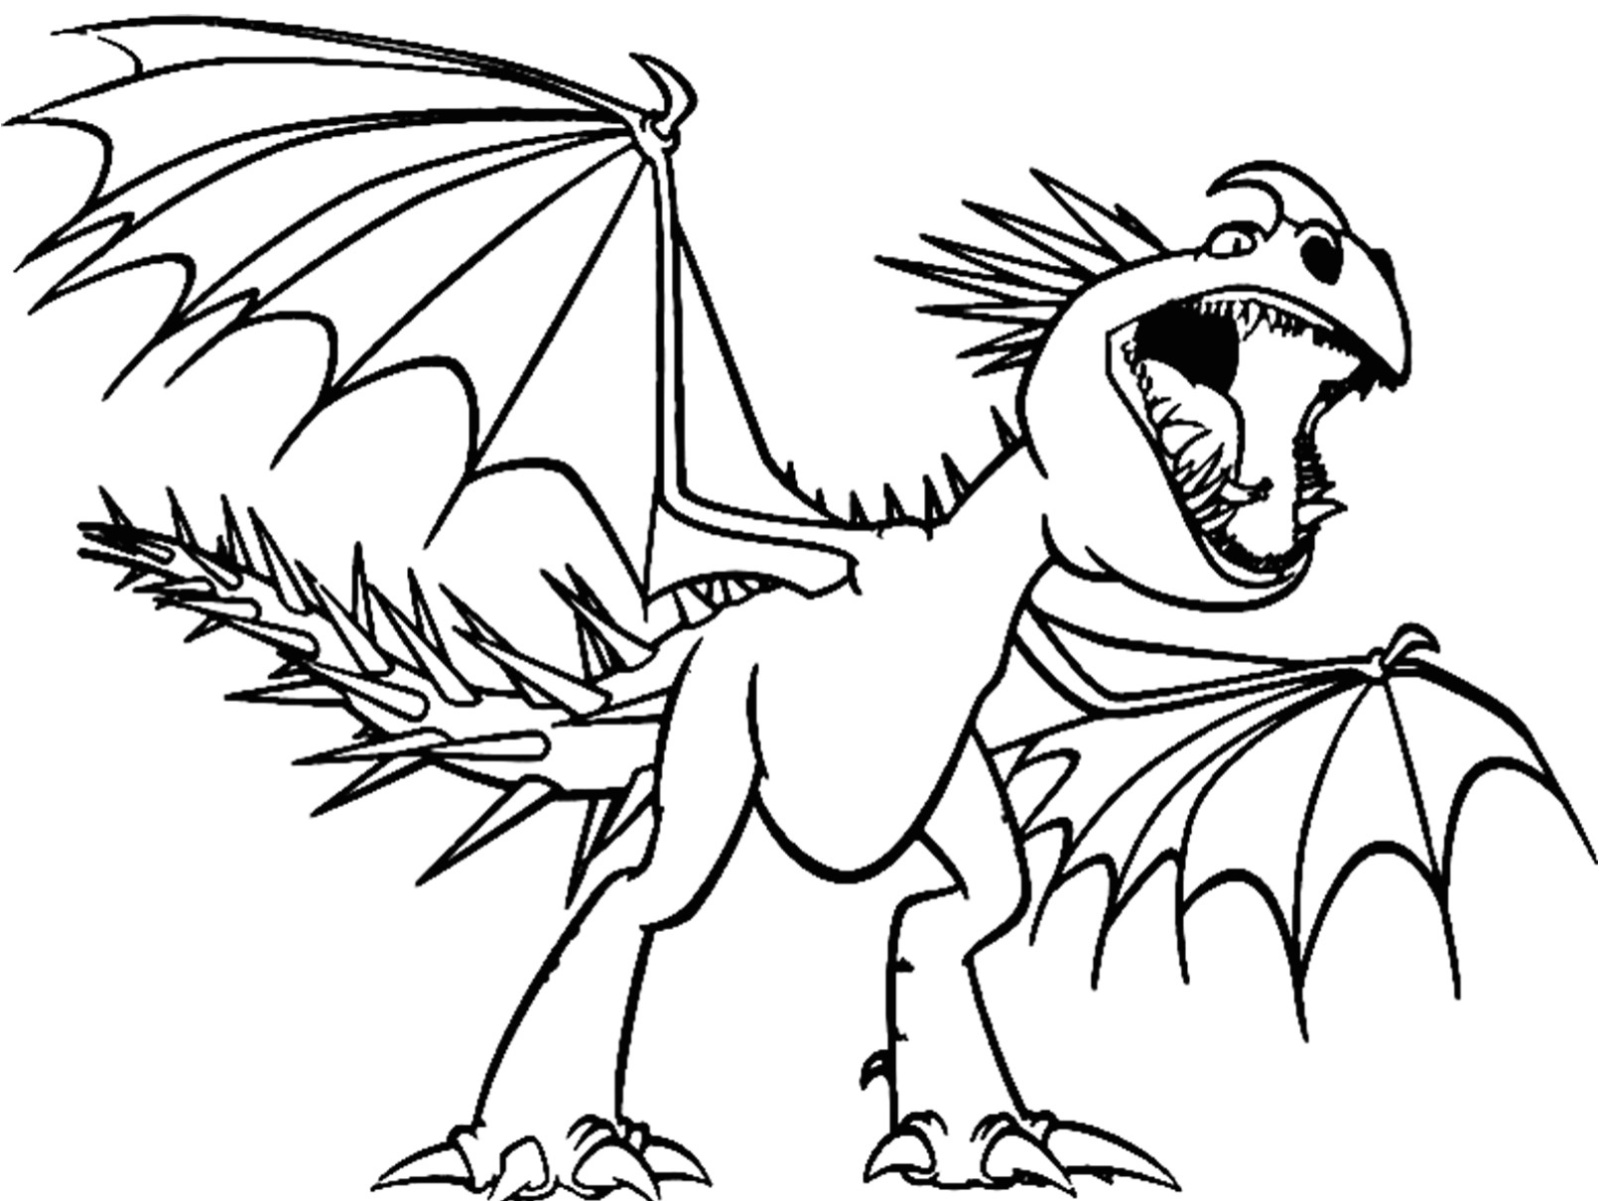 Free How To Train Your Dragon Coloring Pages Pdf - Coloringfolder.com